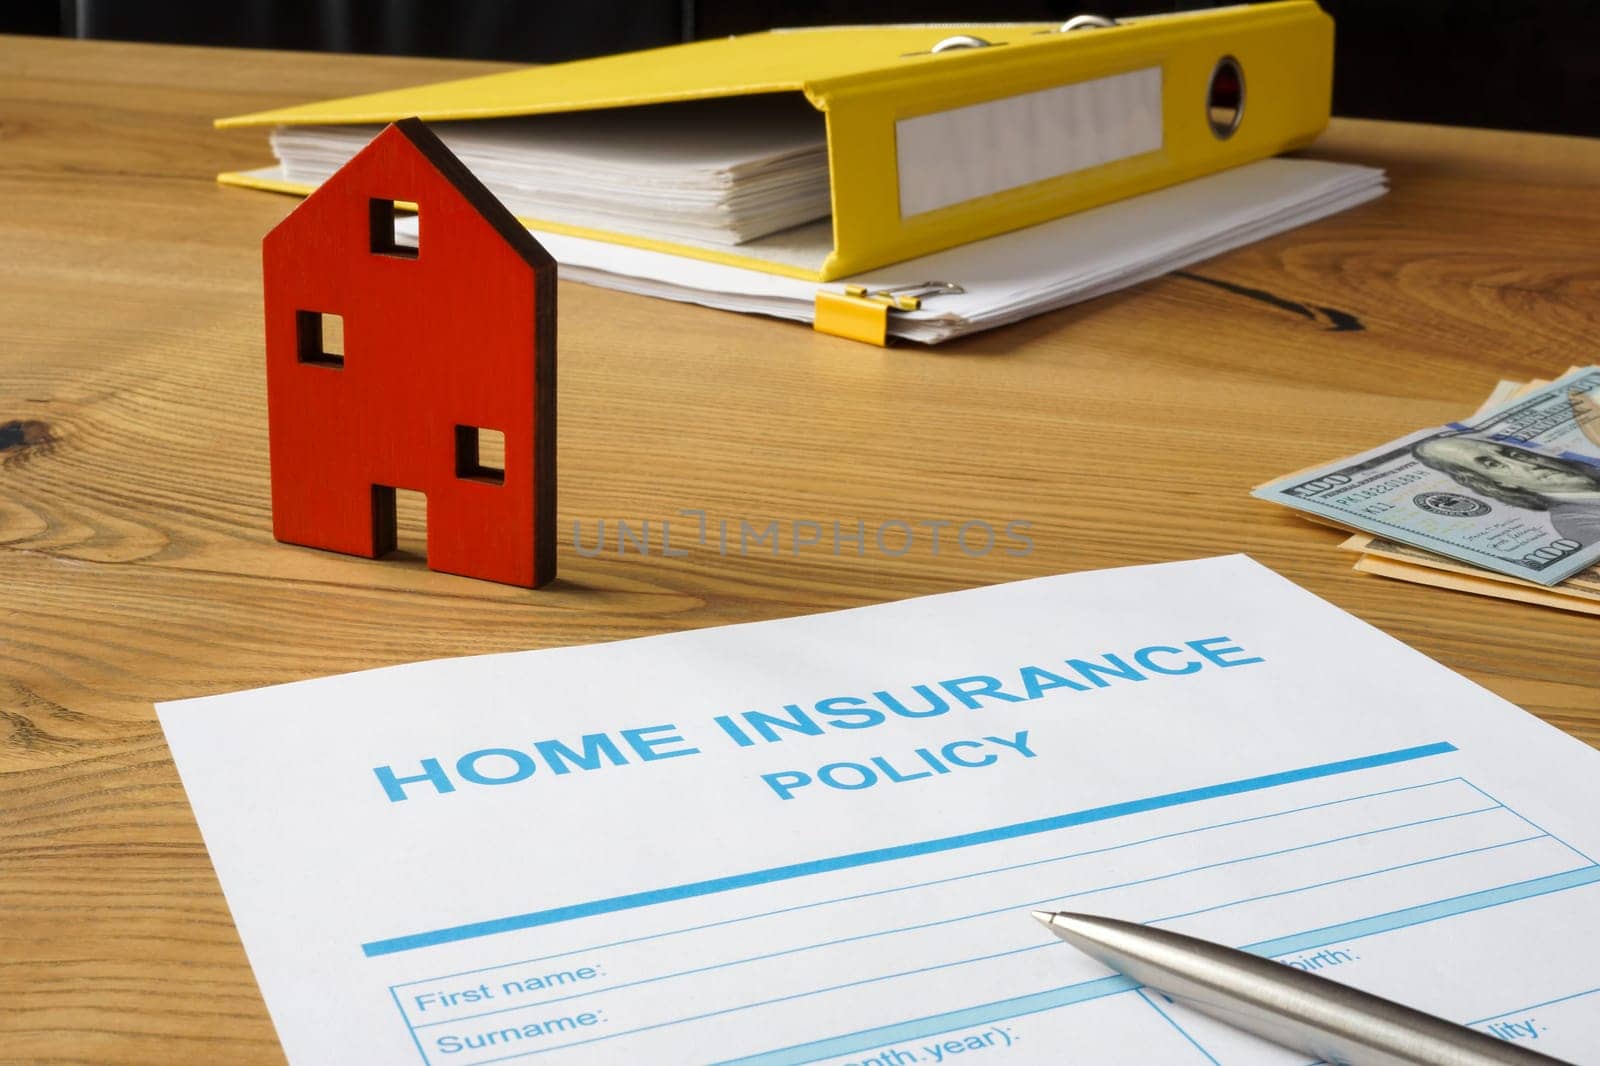 Home insurance policy ready for signing. by designer491